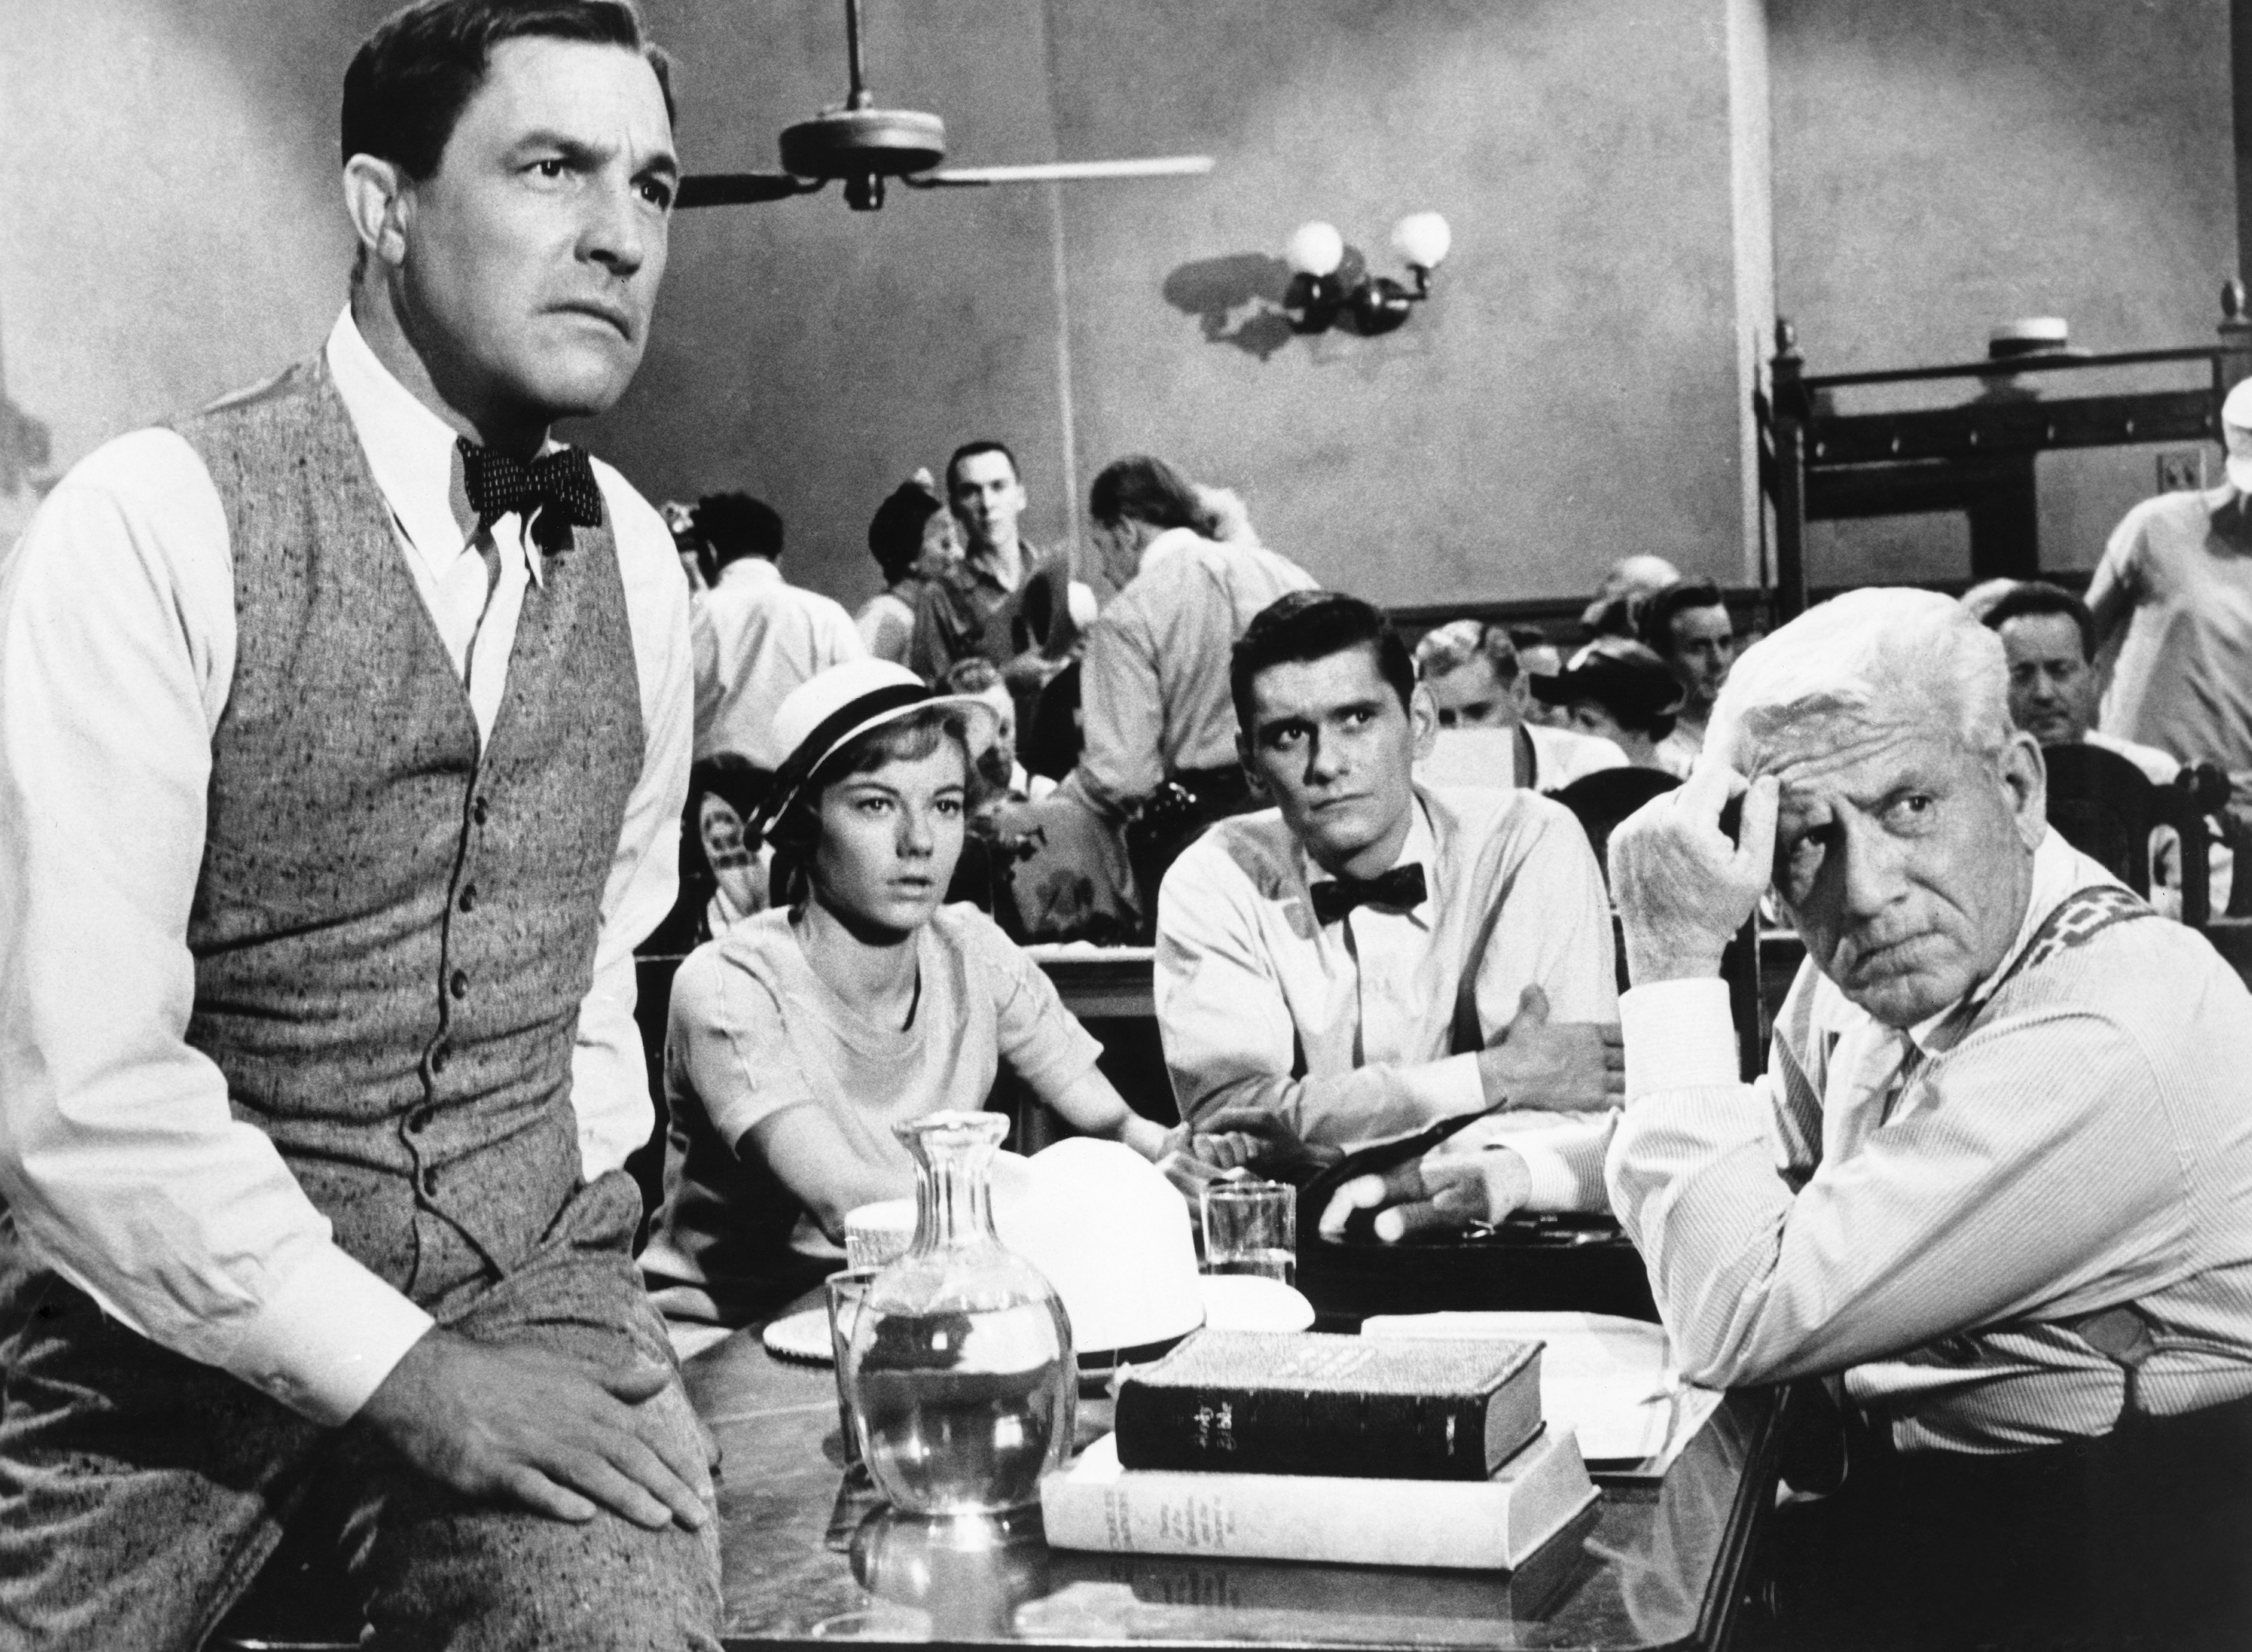 LtR: Gene Kelly as E. K. Hornbeck, Donna Anderson as Rachel Brown, Dick York as Bertram T. Cates, and Spencer Tracy as Henry Drummond in Inherit the Wind. They’re all looking concerned as they sit around the defendant’s table in a packed courtroom (Hornbeck is leaning with one leg up on the table. Brown has a cute little sunhat on and the men are in their shirtsleeves despite the formal setting.